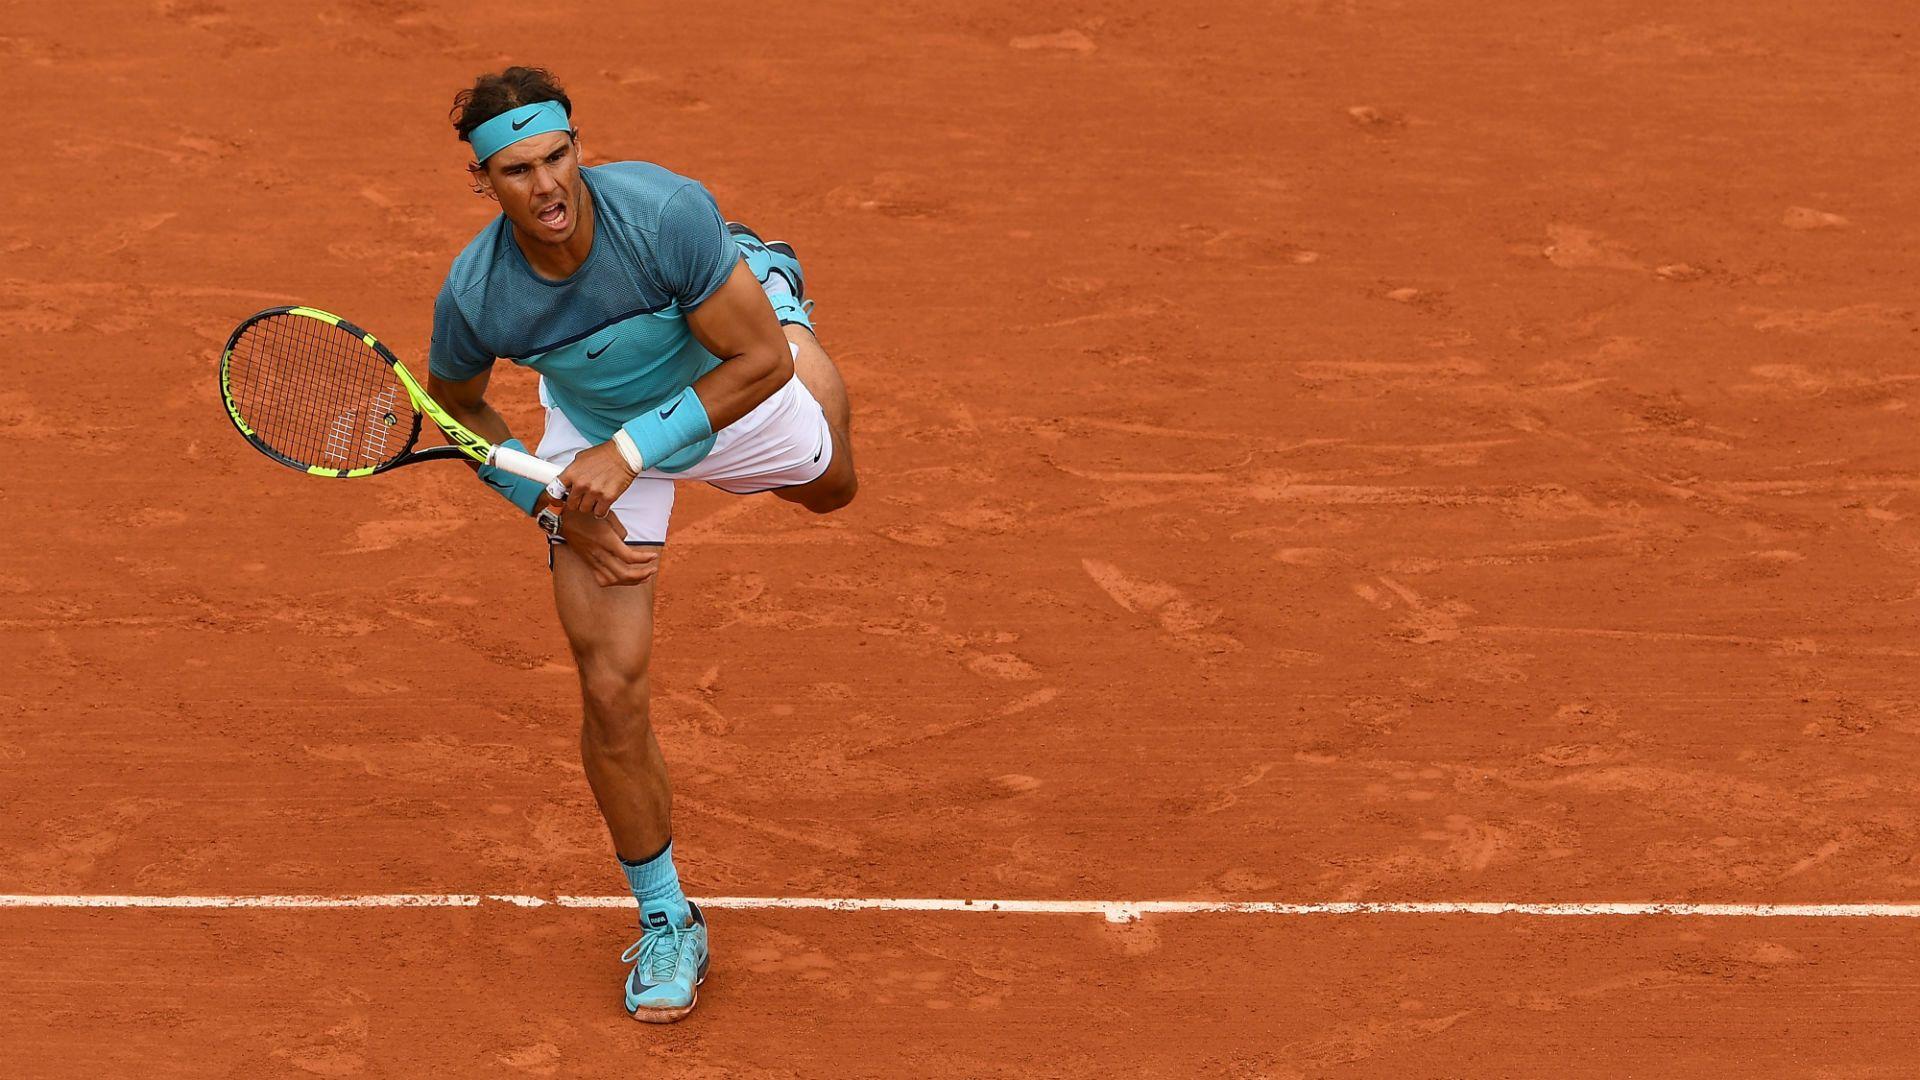 French Open 2017: Nadal's remarkable record and a long wait for home